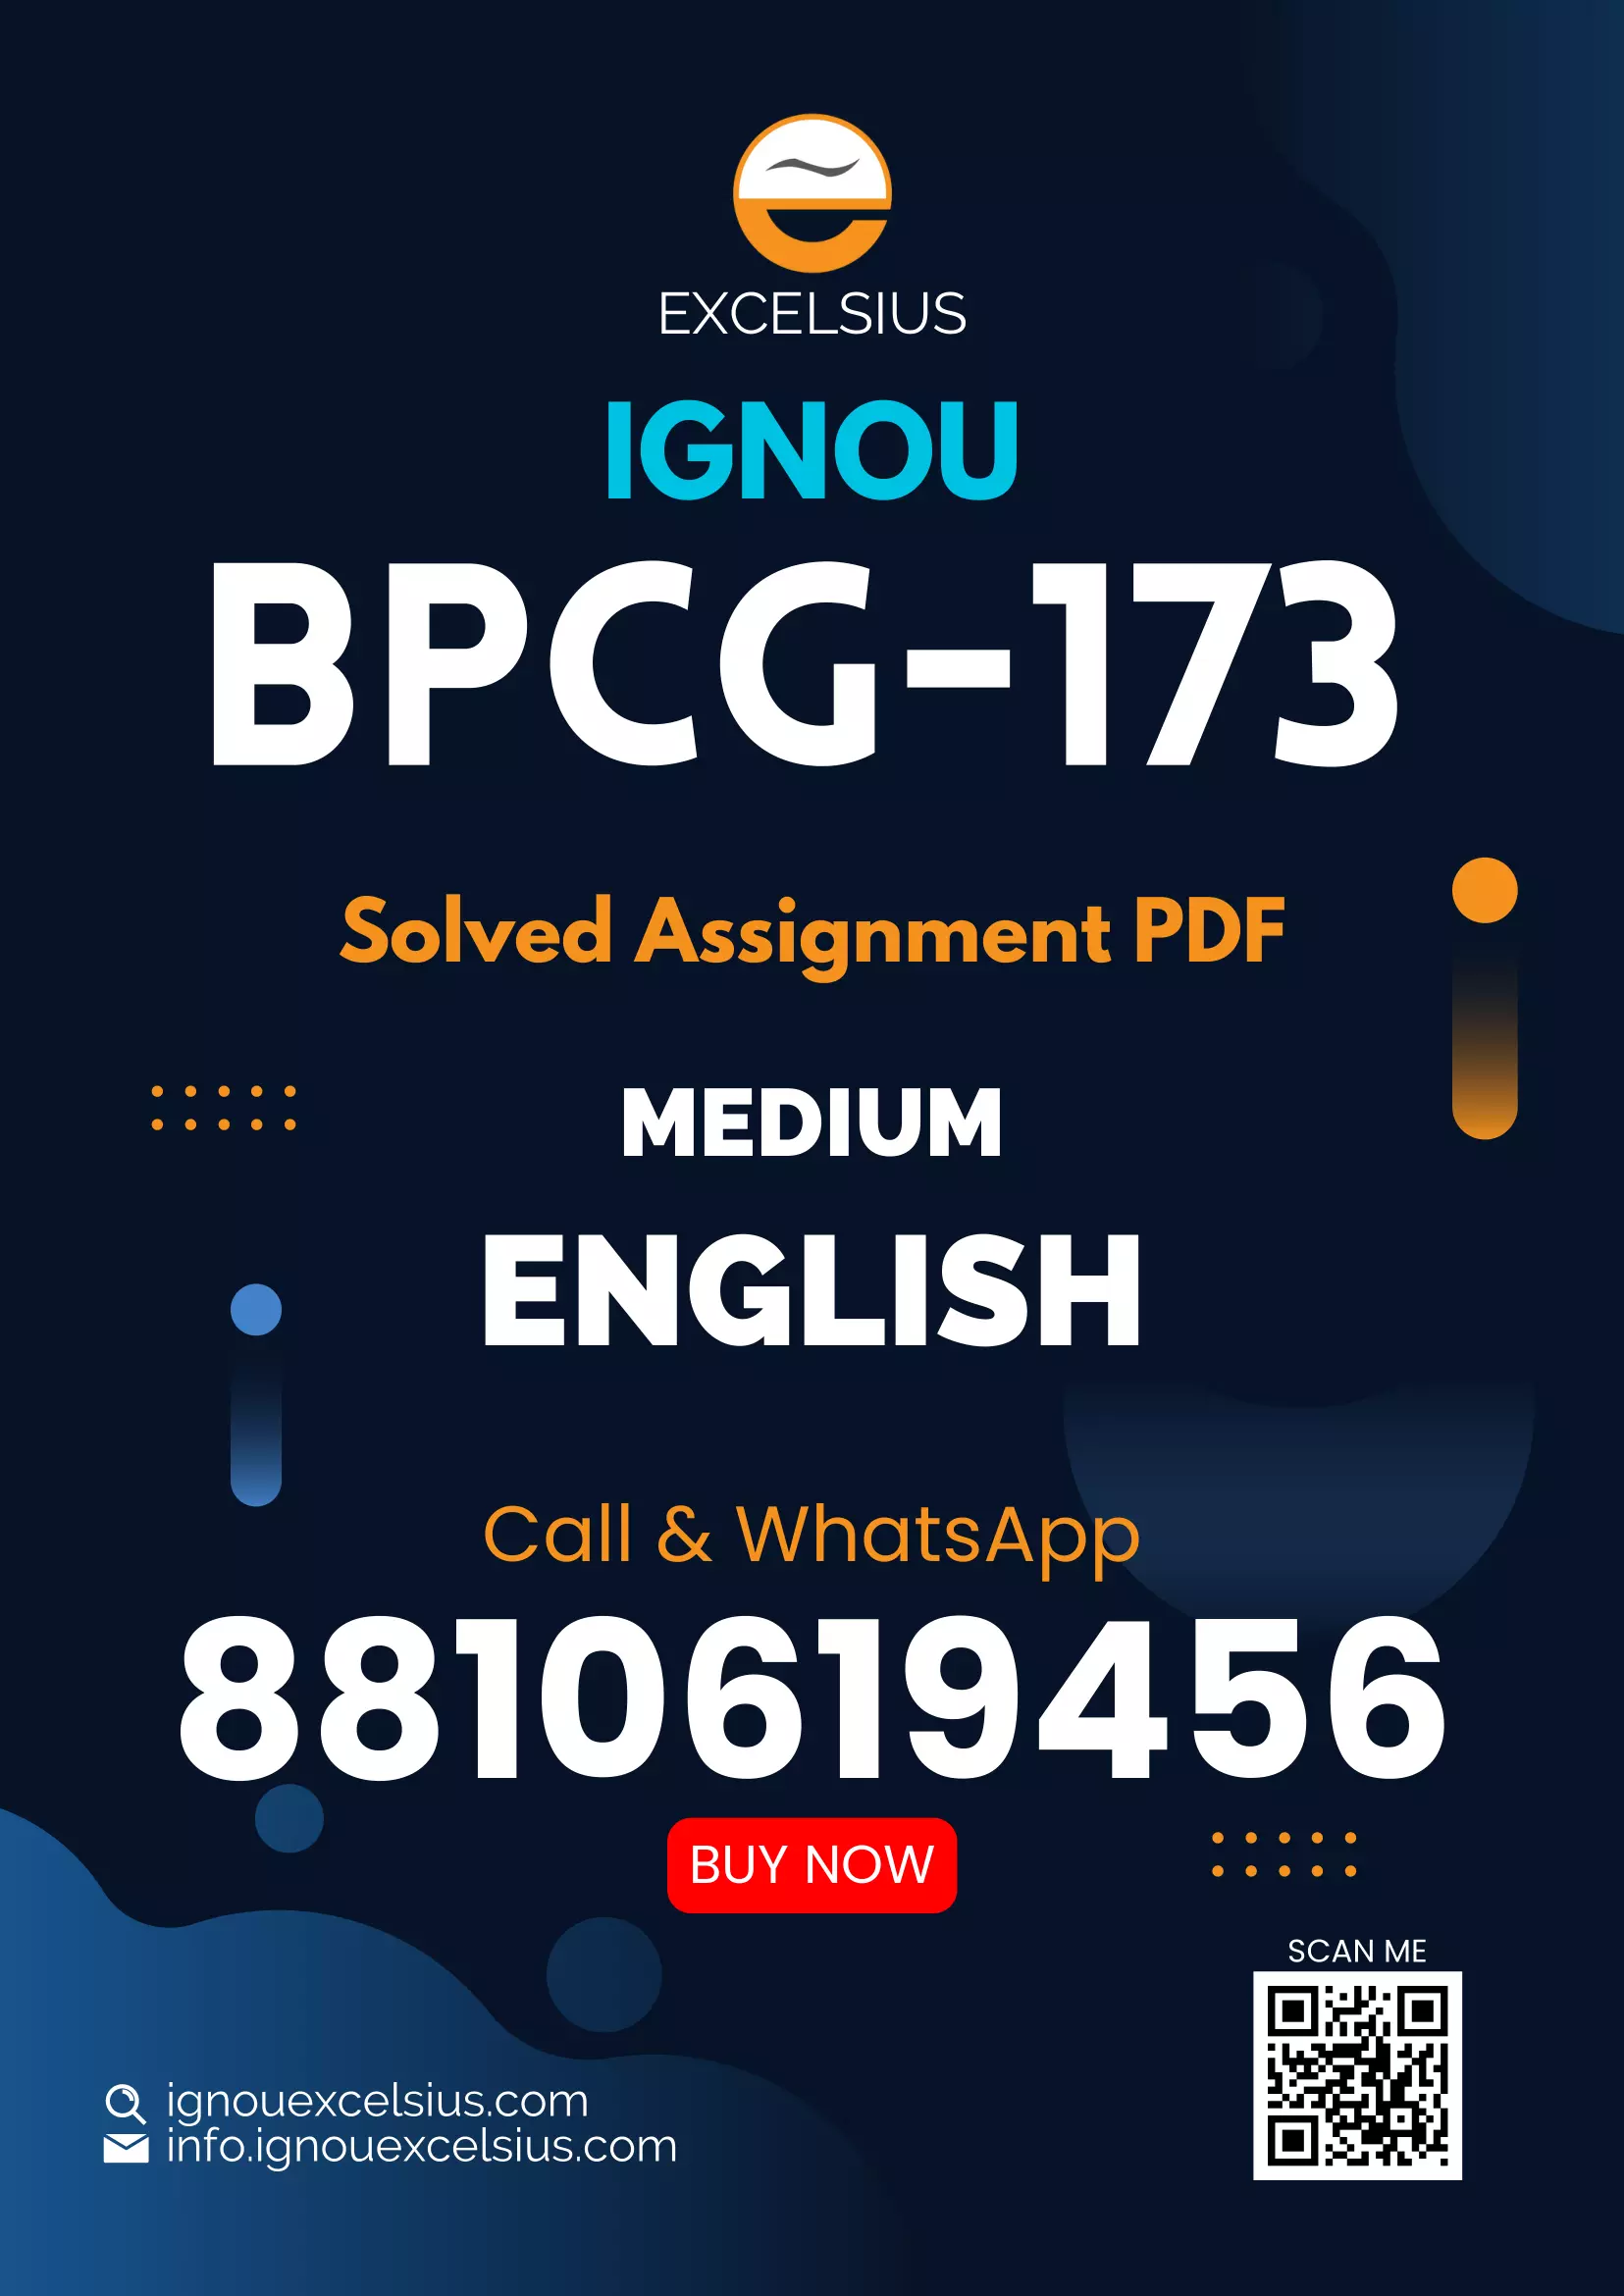 IGNOU BPCG-173 - Psychology for Health and Well Being, Latest Solved Assignment -July 2022 – January 2023